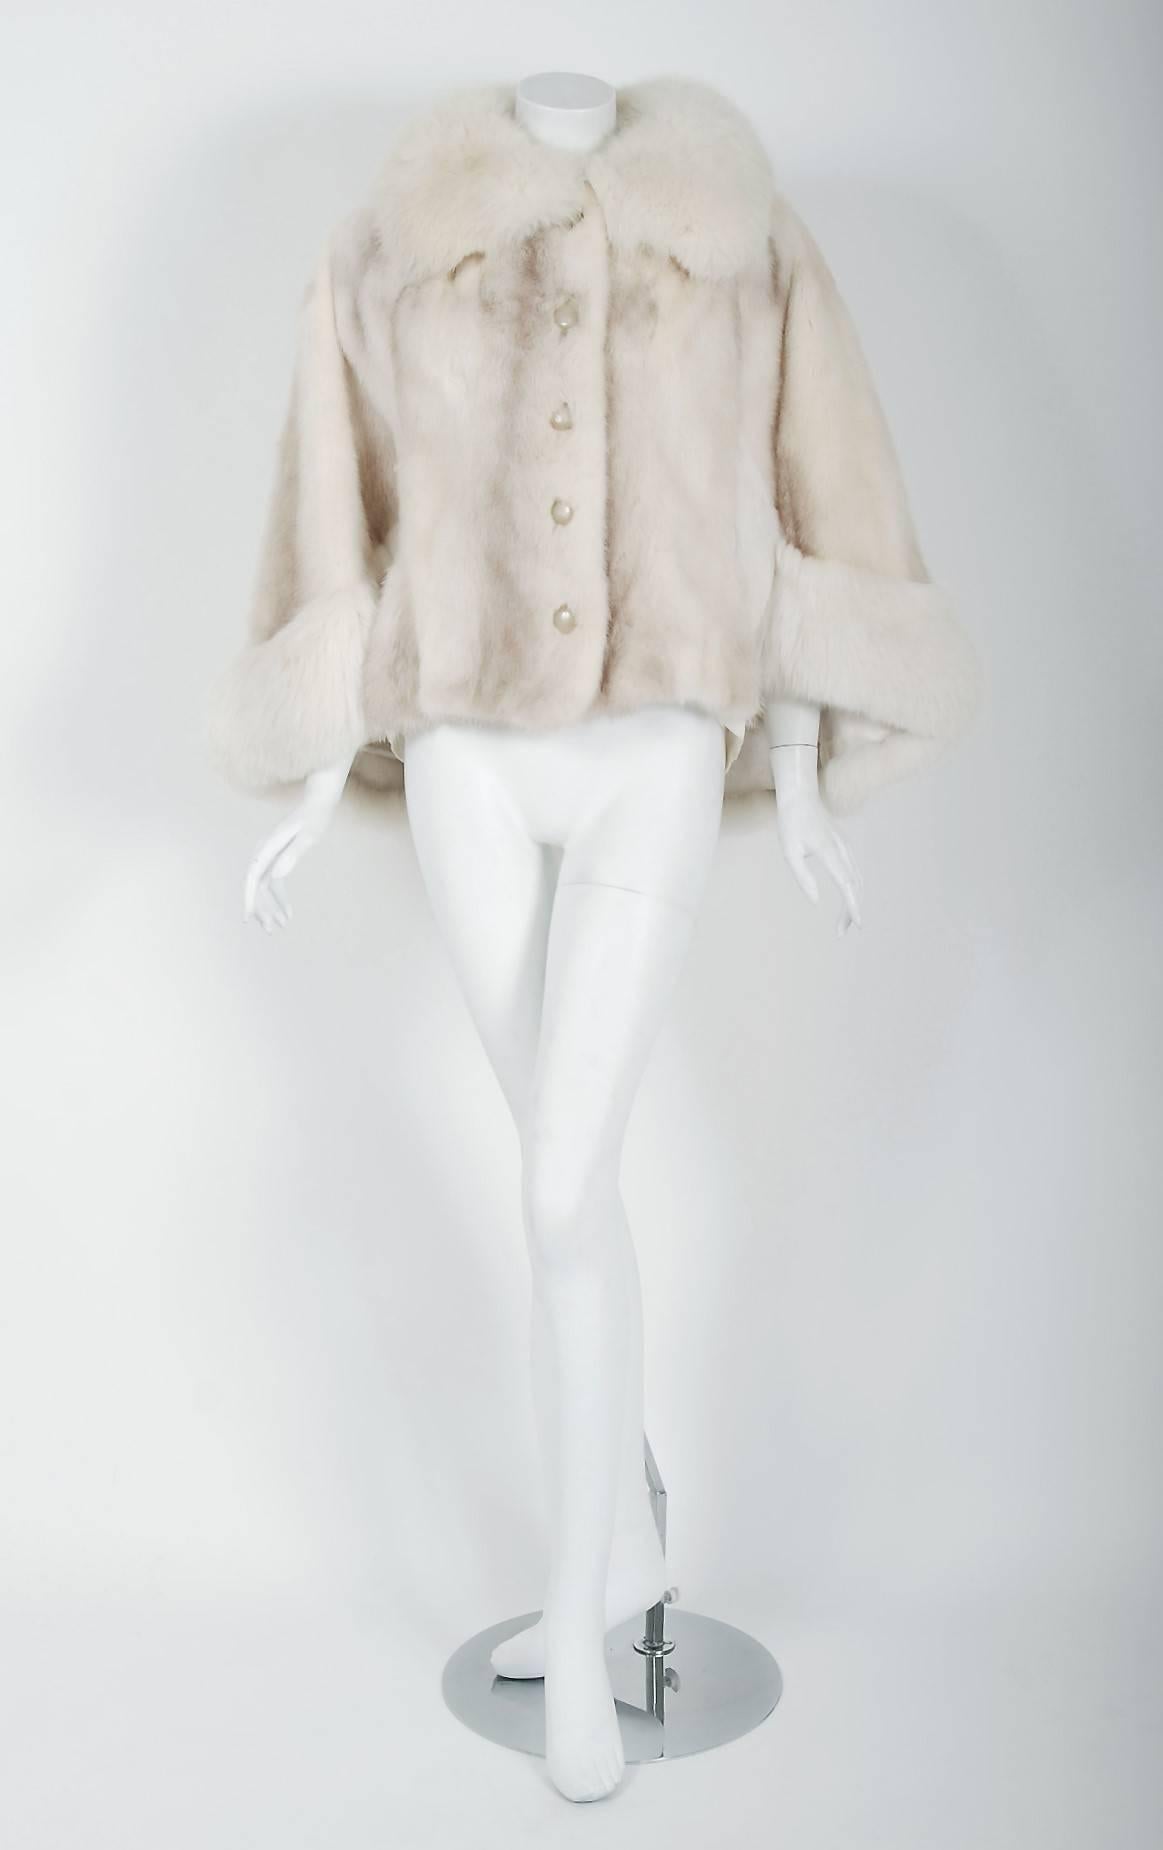 An extraordinary, ivory-white genuine mink and arctic fox cape that will make any woman shine during the winter season! It is easy to see the level of quality in this Diane Furs piece; the fur is extremely supple and soft. The jacket is pieced